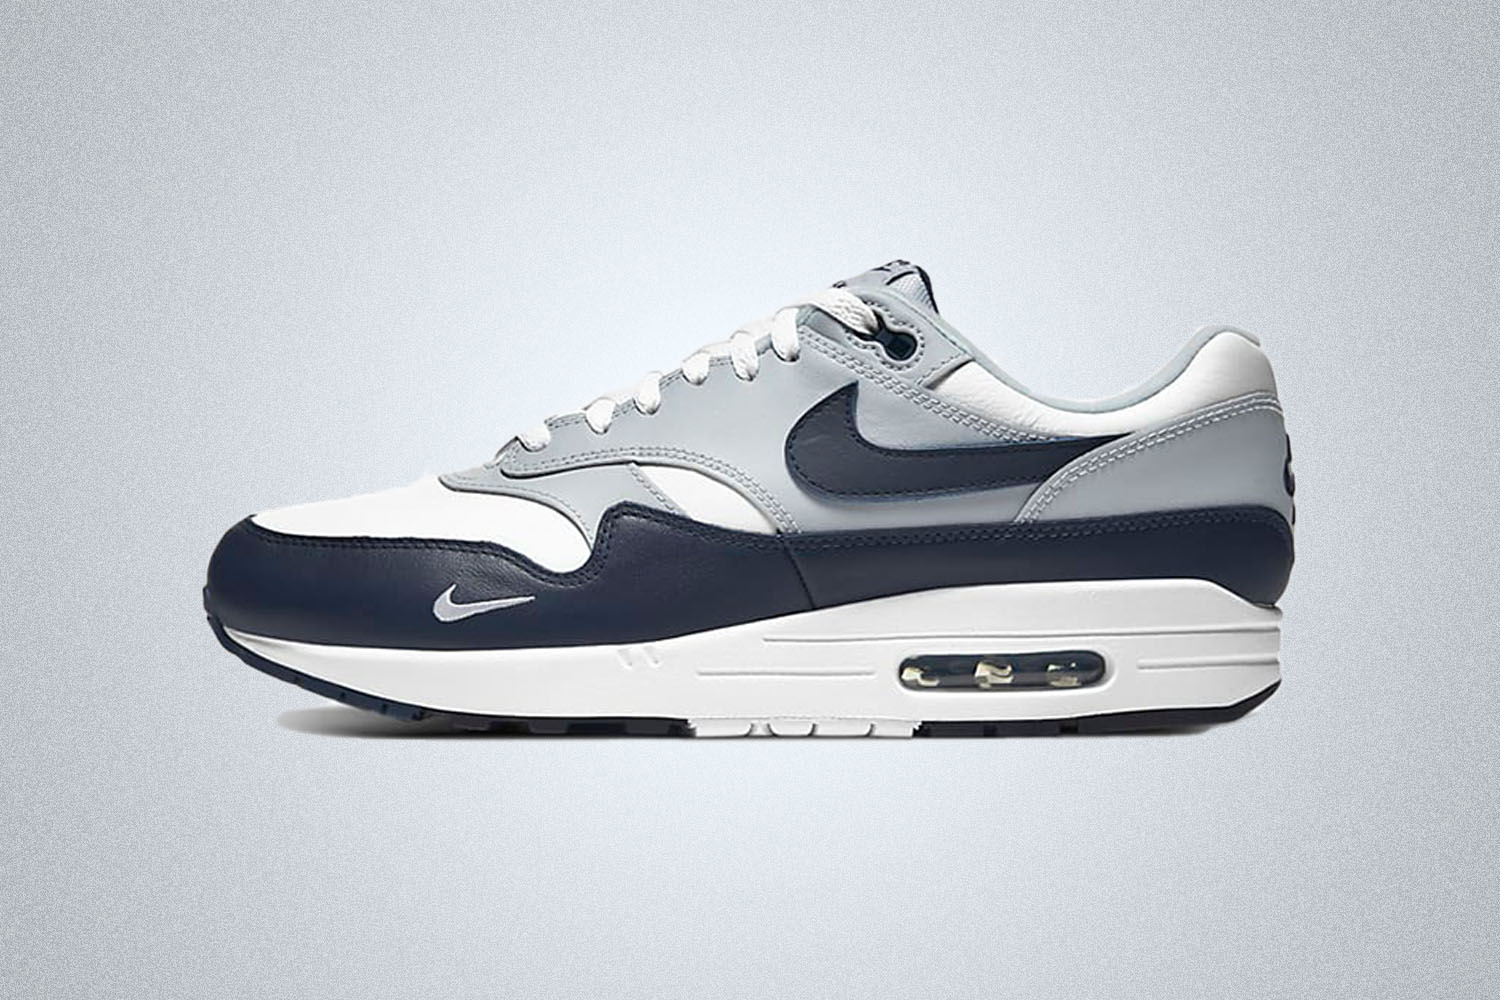 Comida sana ponerse en cuclillas Oculto Which Nike Air Max Sneaker Model Is Right for You? - InsideHook